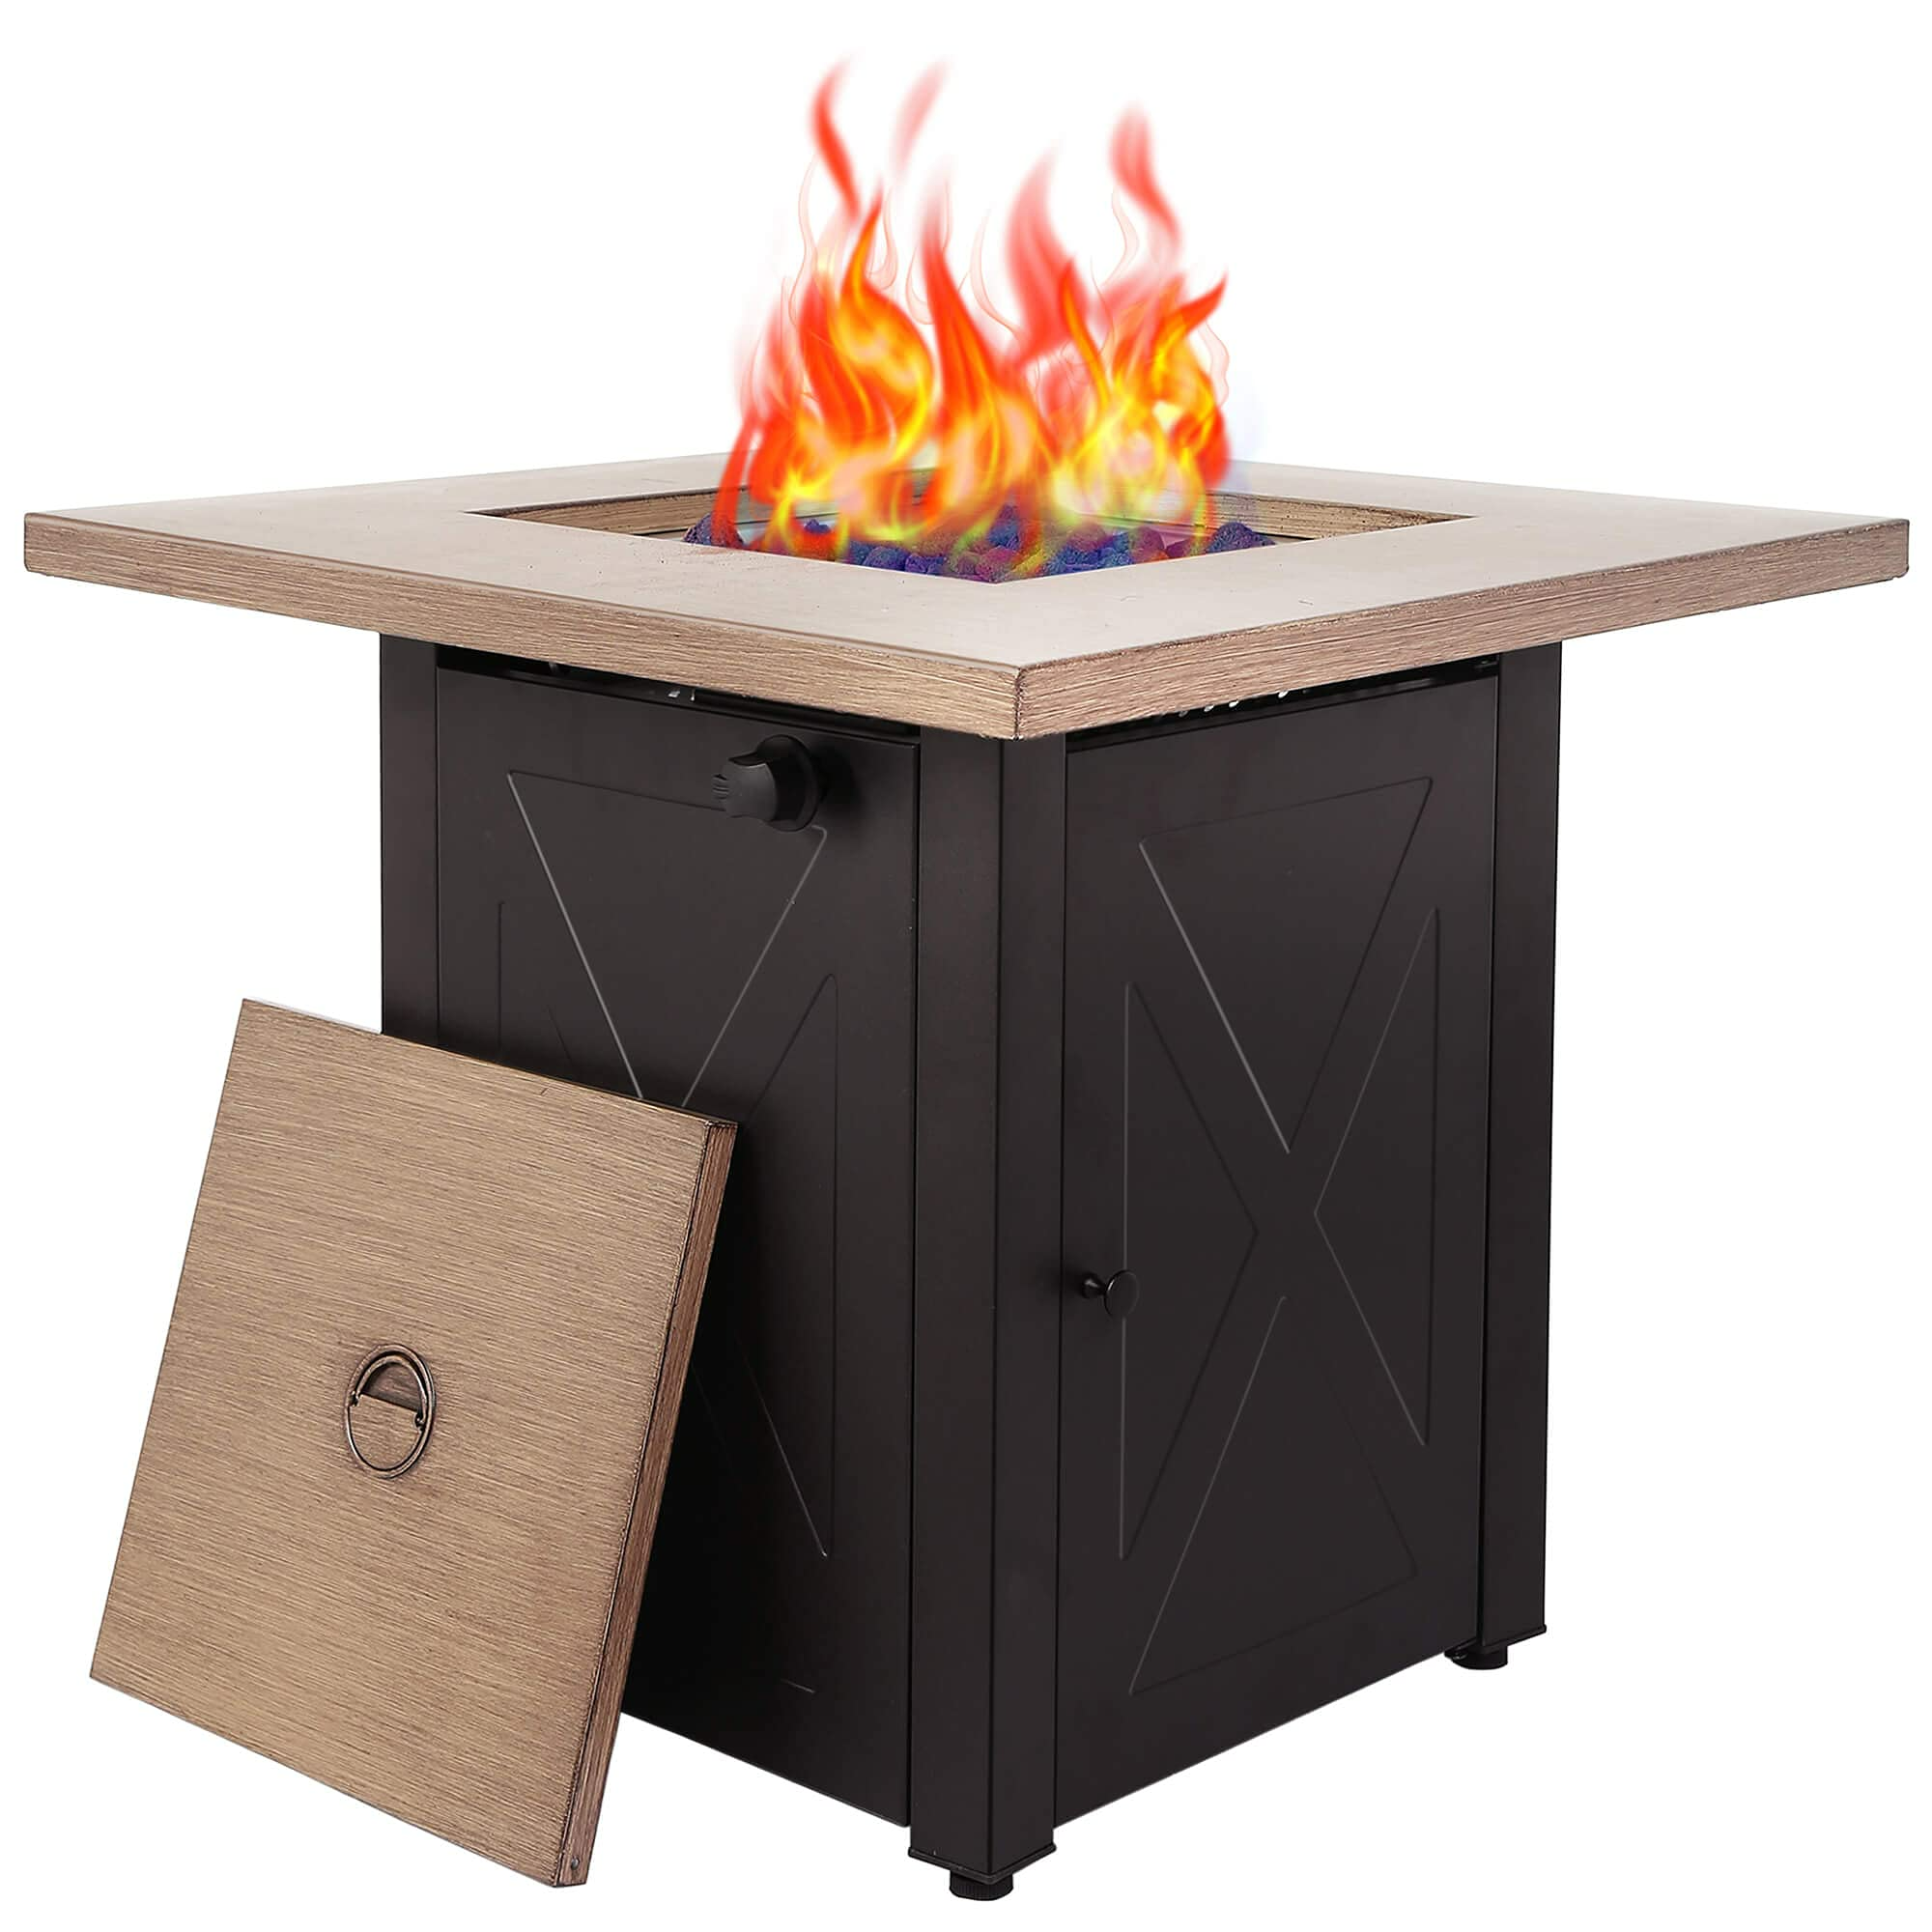 28inch Outdoor Gas Fire Pit Table , 48,000 BTU, Square Outside Propane Patio Fire-table, Bionic Wood Grain Lid-Boyel Living